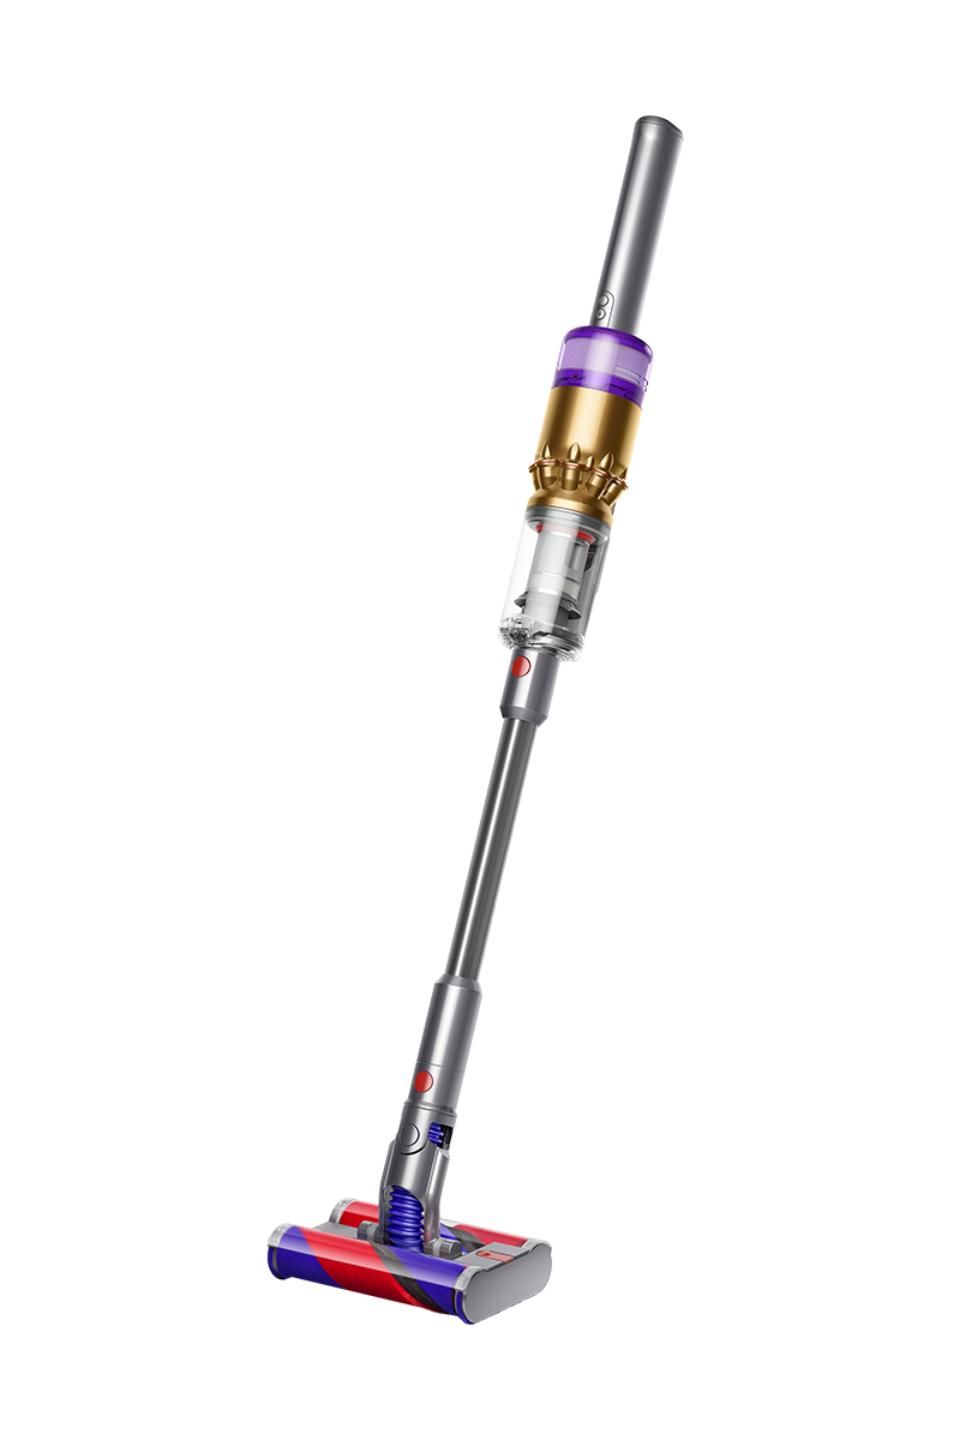 8 Best Dyson Vacuums, Tested by Esquire